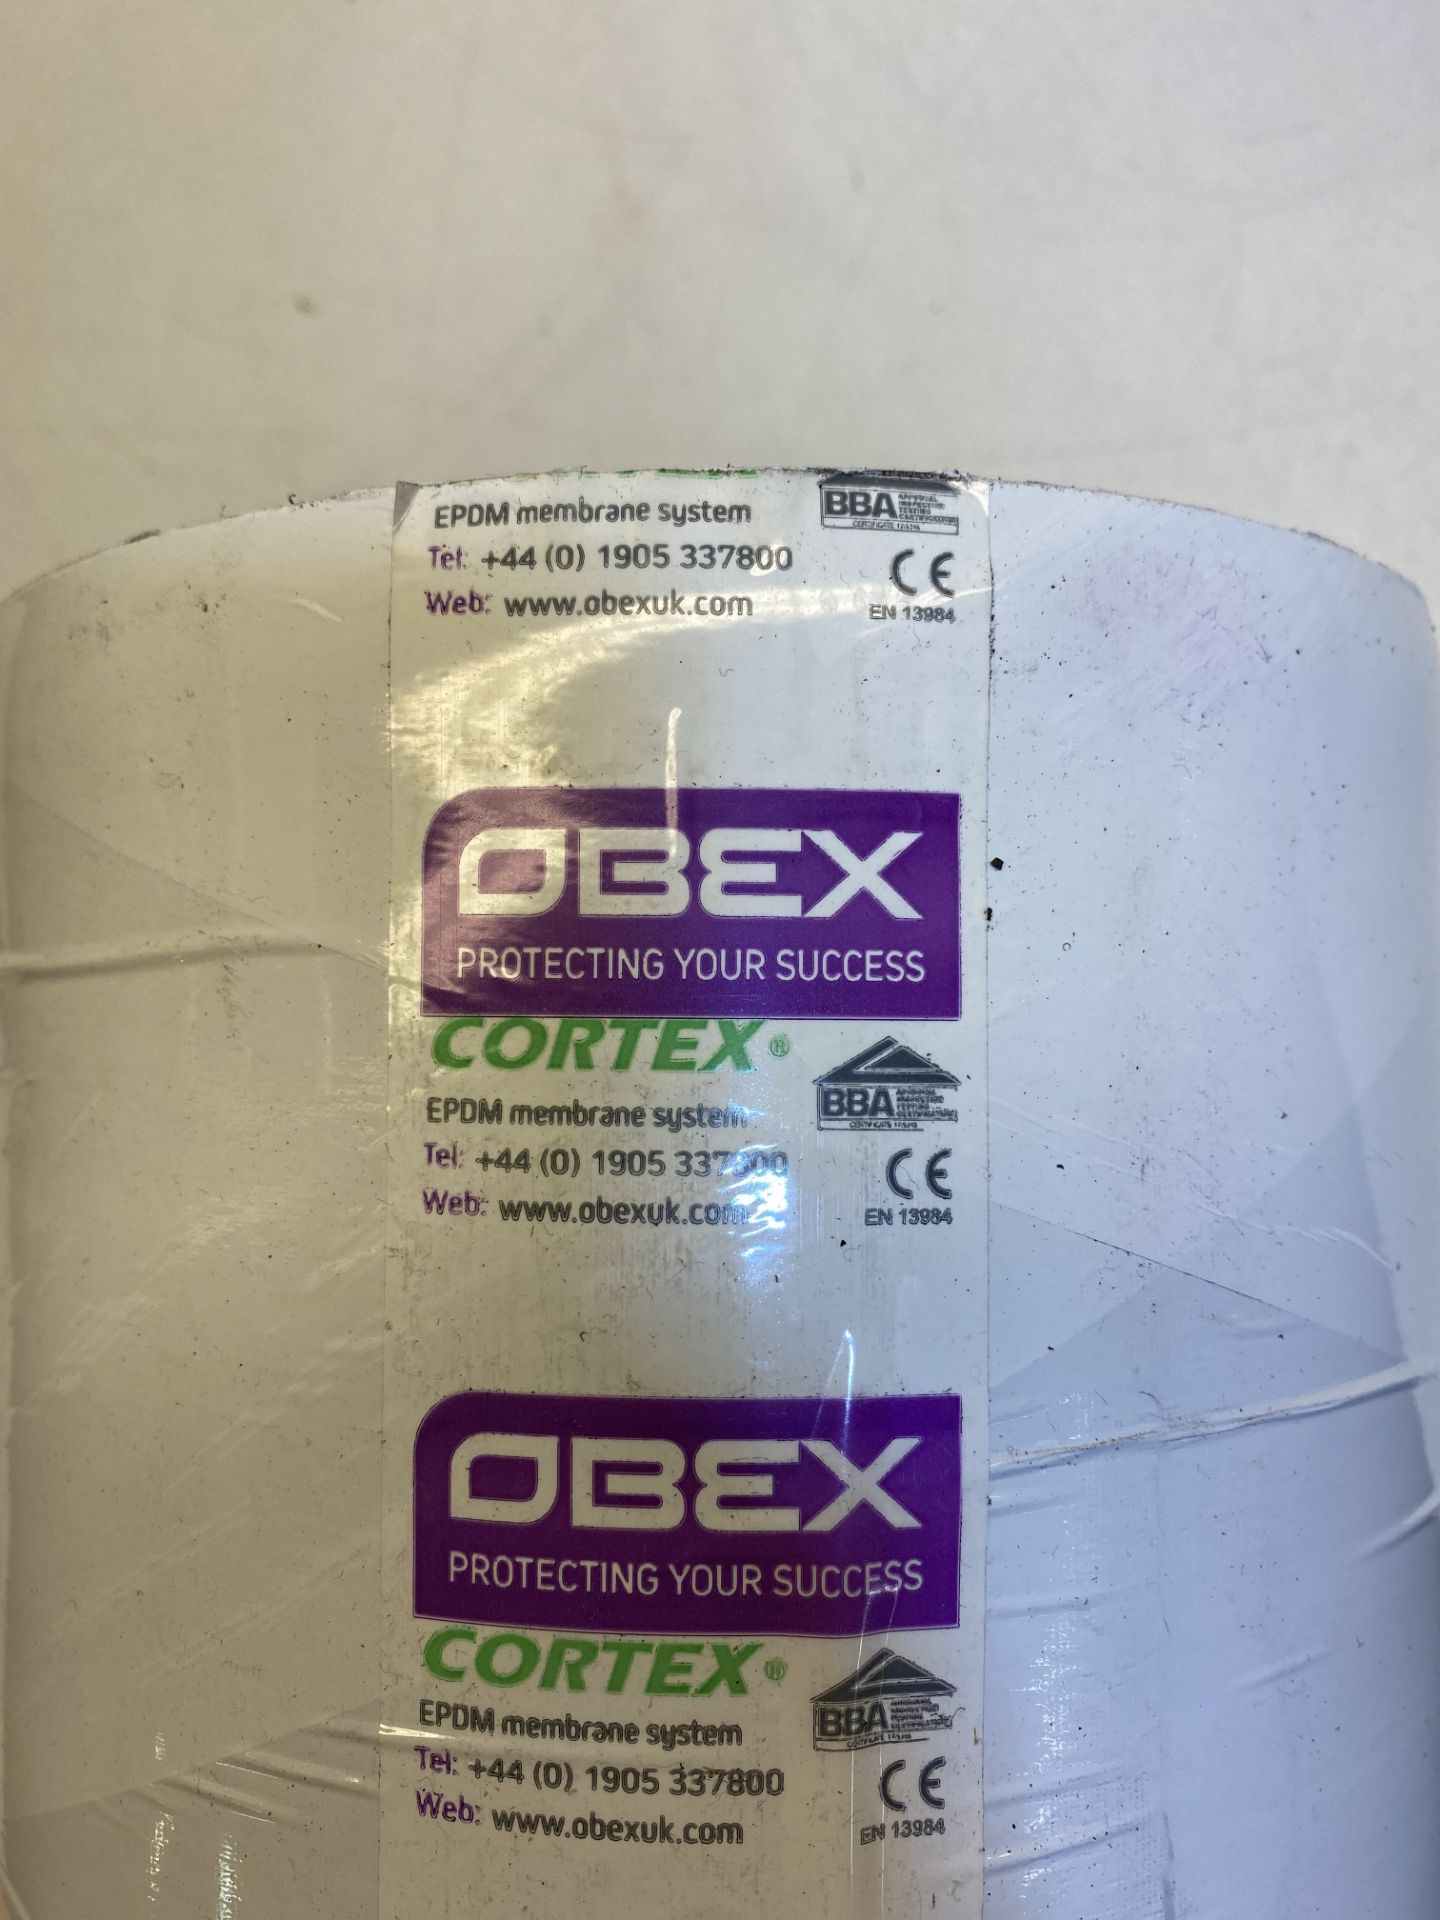 7 x Various Size Rolls Of Obex Corlex Black EPDM Membrane As Seen In Photos - Image 9 of 9